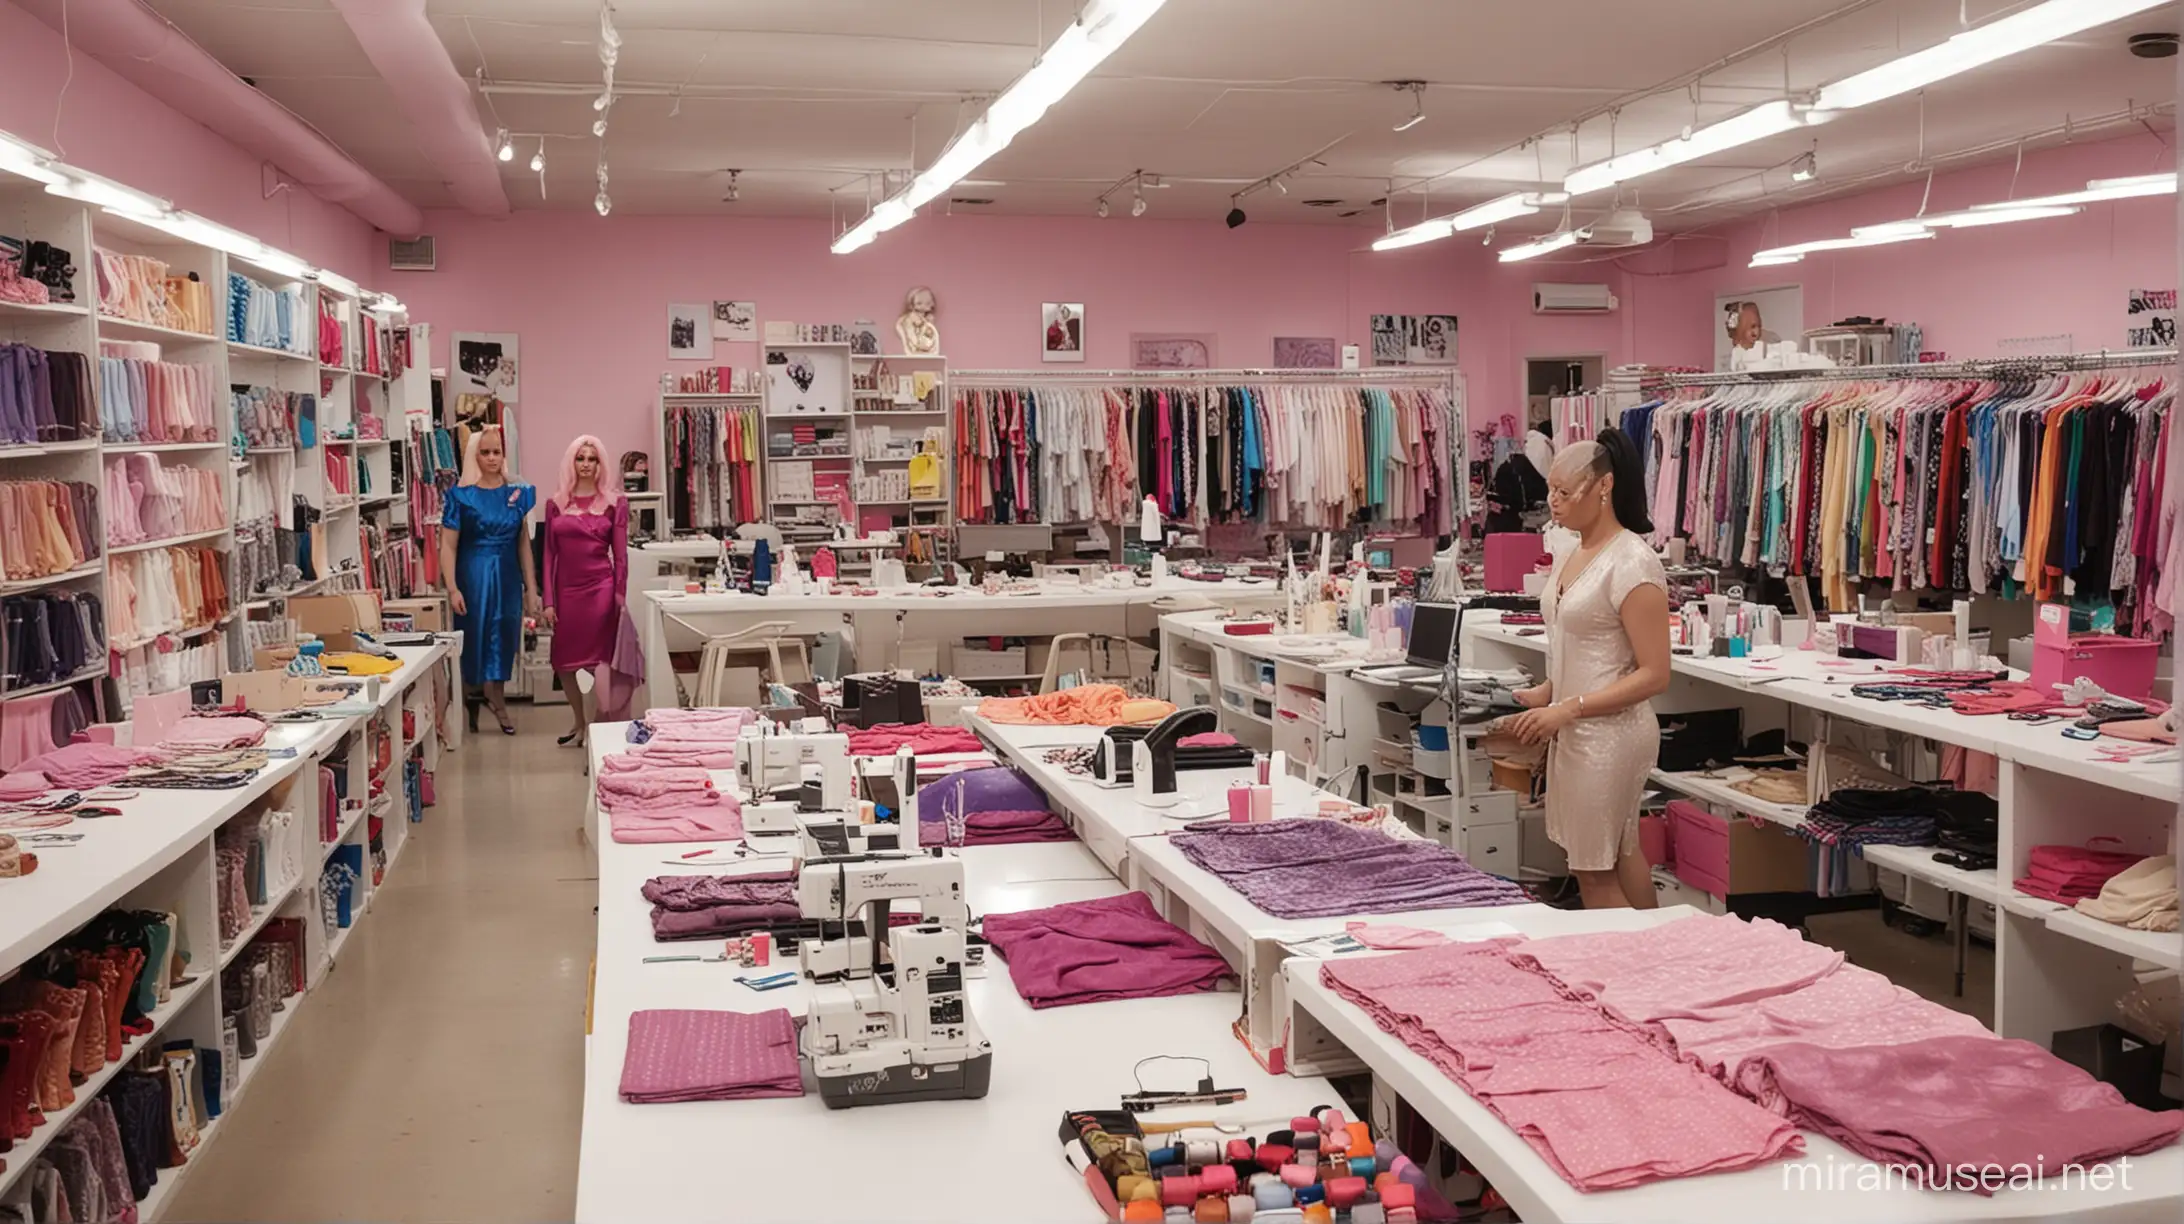 sewing workshop for people who perform drag inside a fabric store, in which they have tables to work individually, they can grab any material from fabrics, shoes, wigs, makeup, etc., ask for help, which looks like the werk room from RuPaul's Drag Race